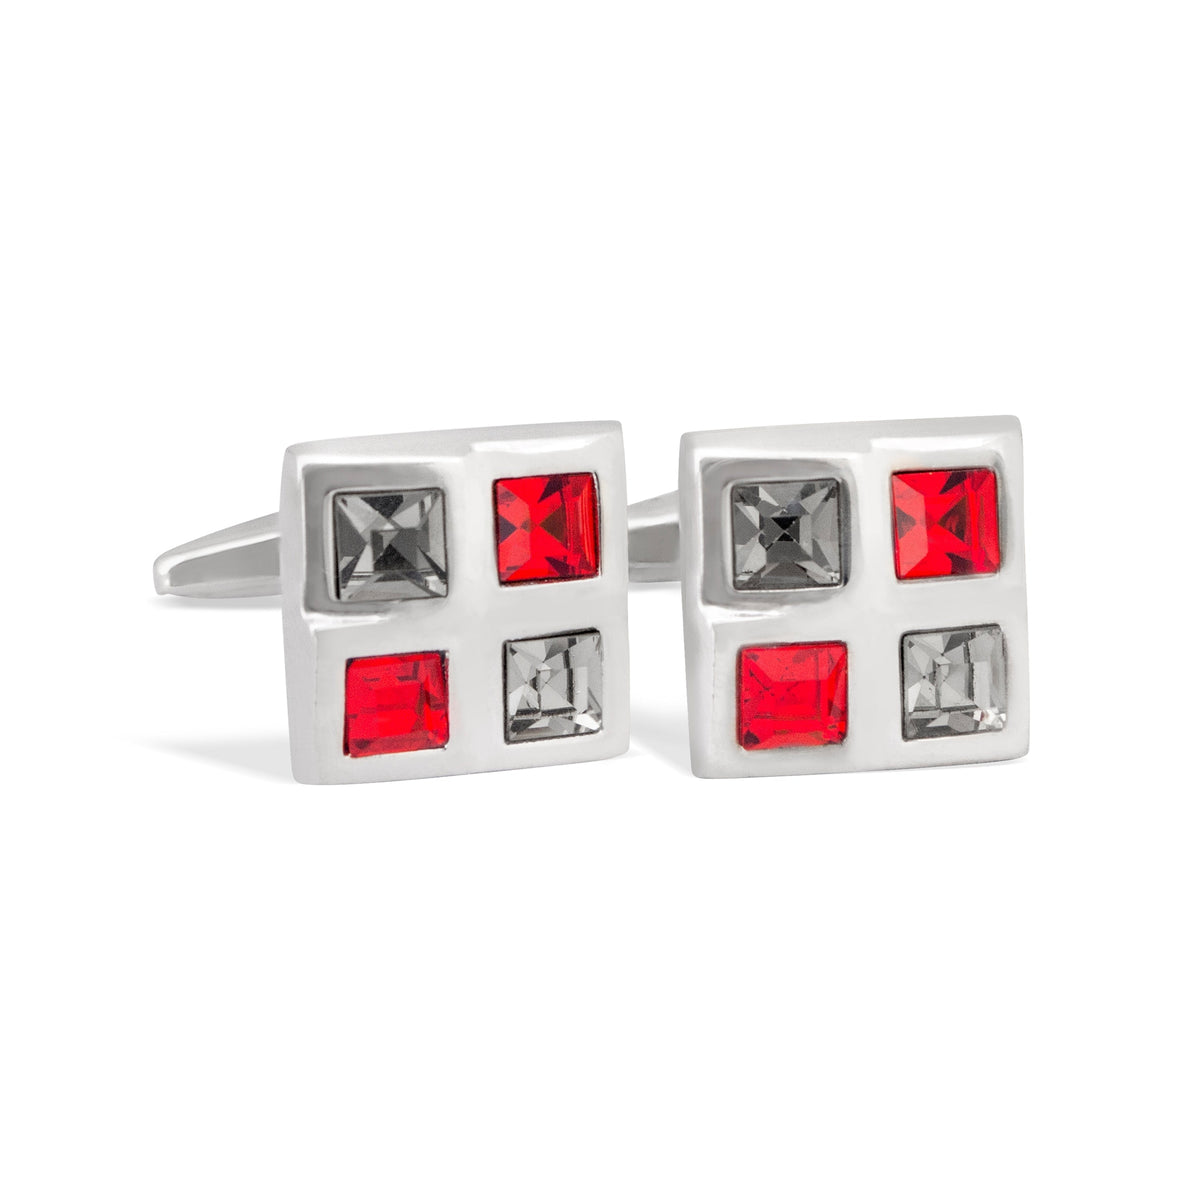 Square Window Red and White Crystals Cufflinks A13-Cufflinks.com.sg